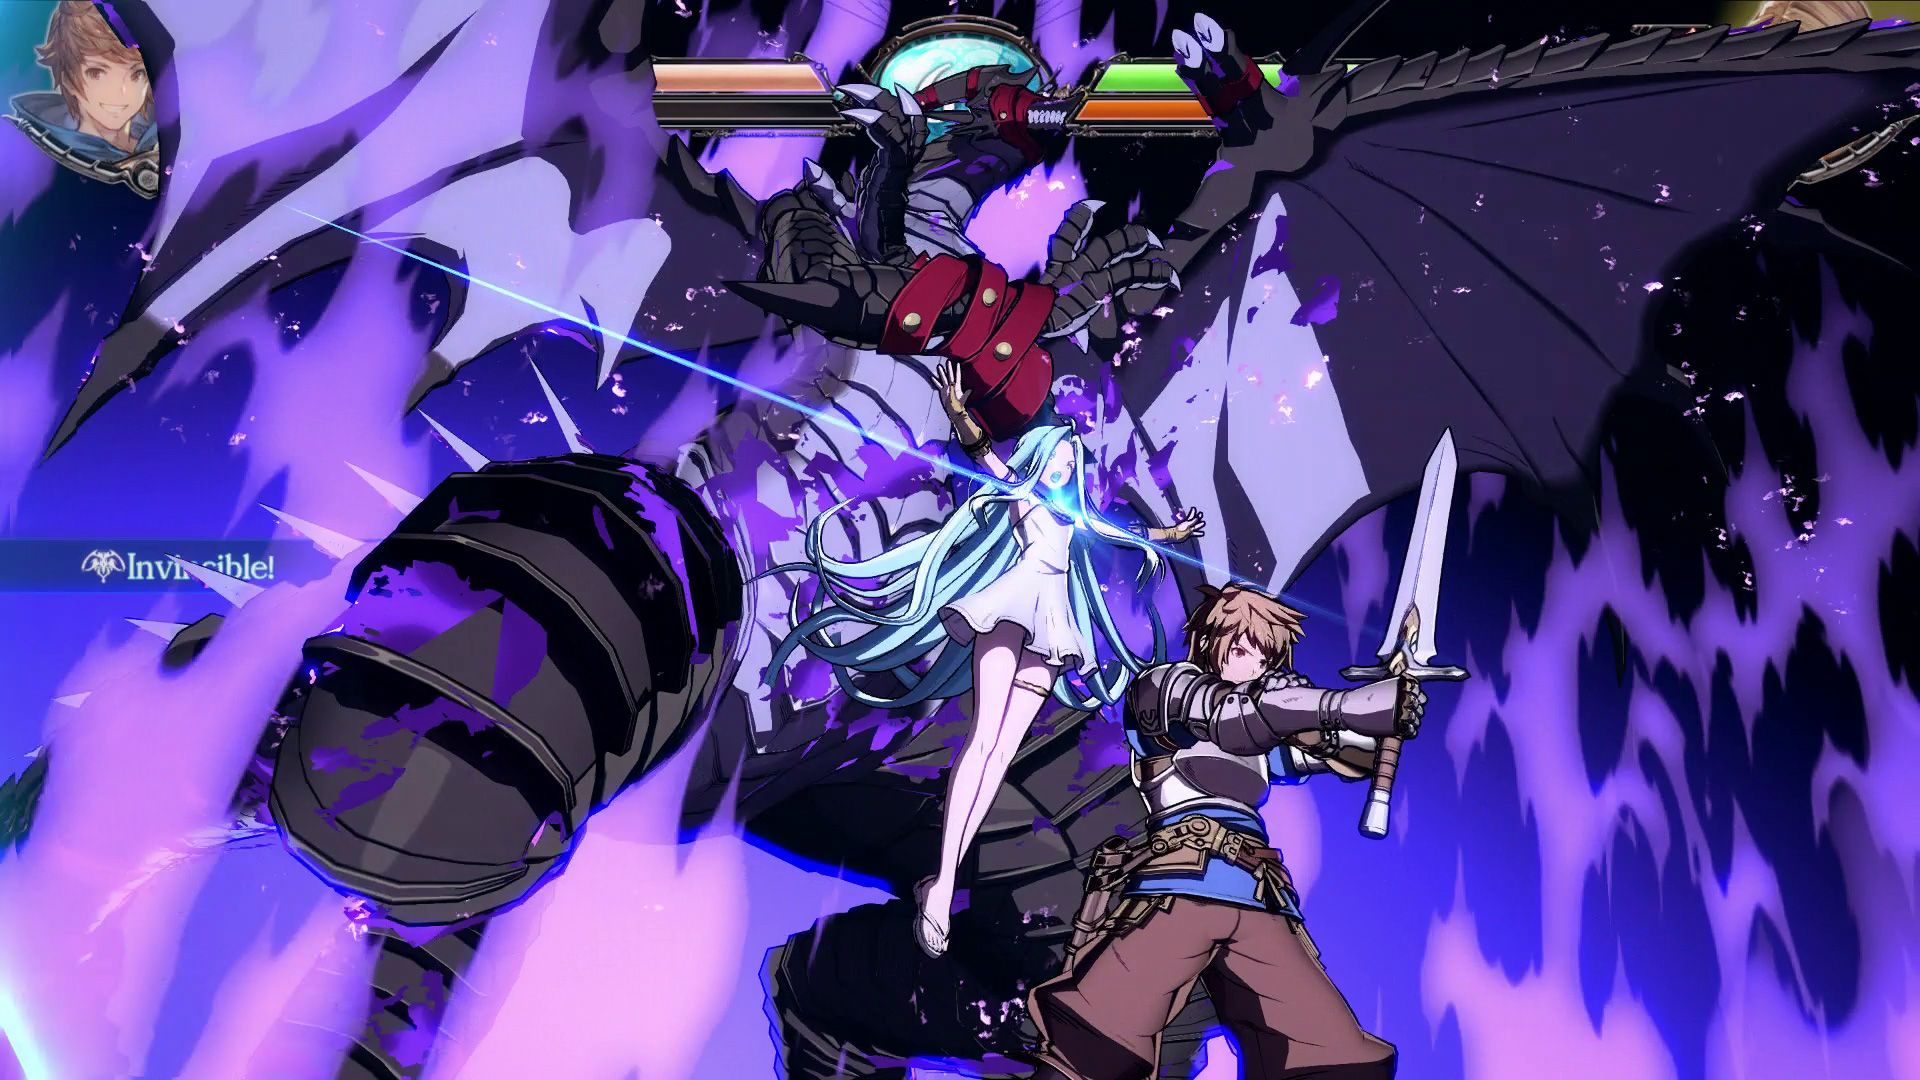 Granblue Fantasy: Versus is out on March 2020